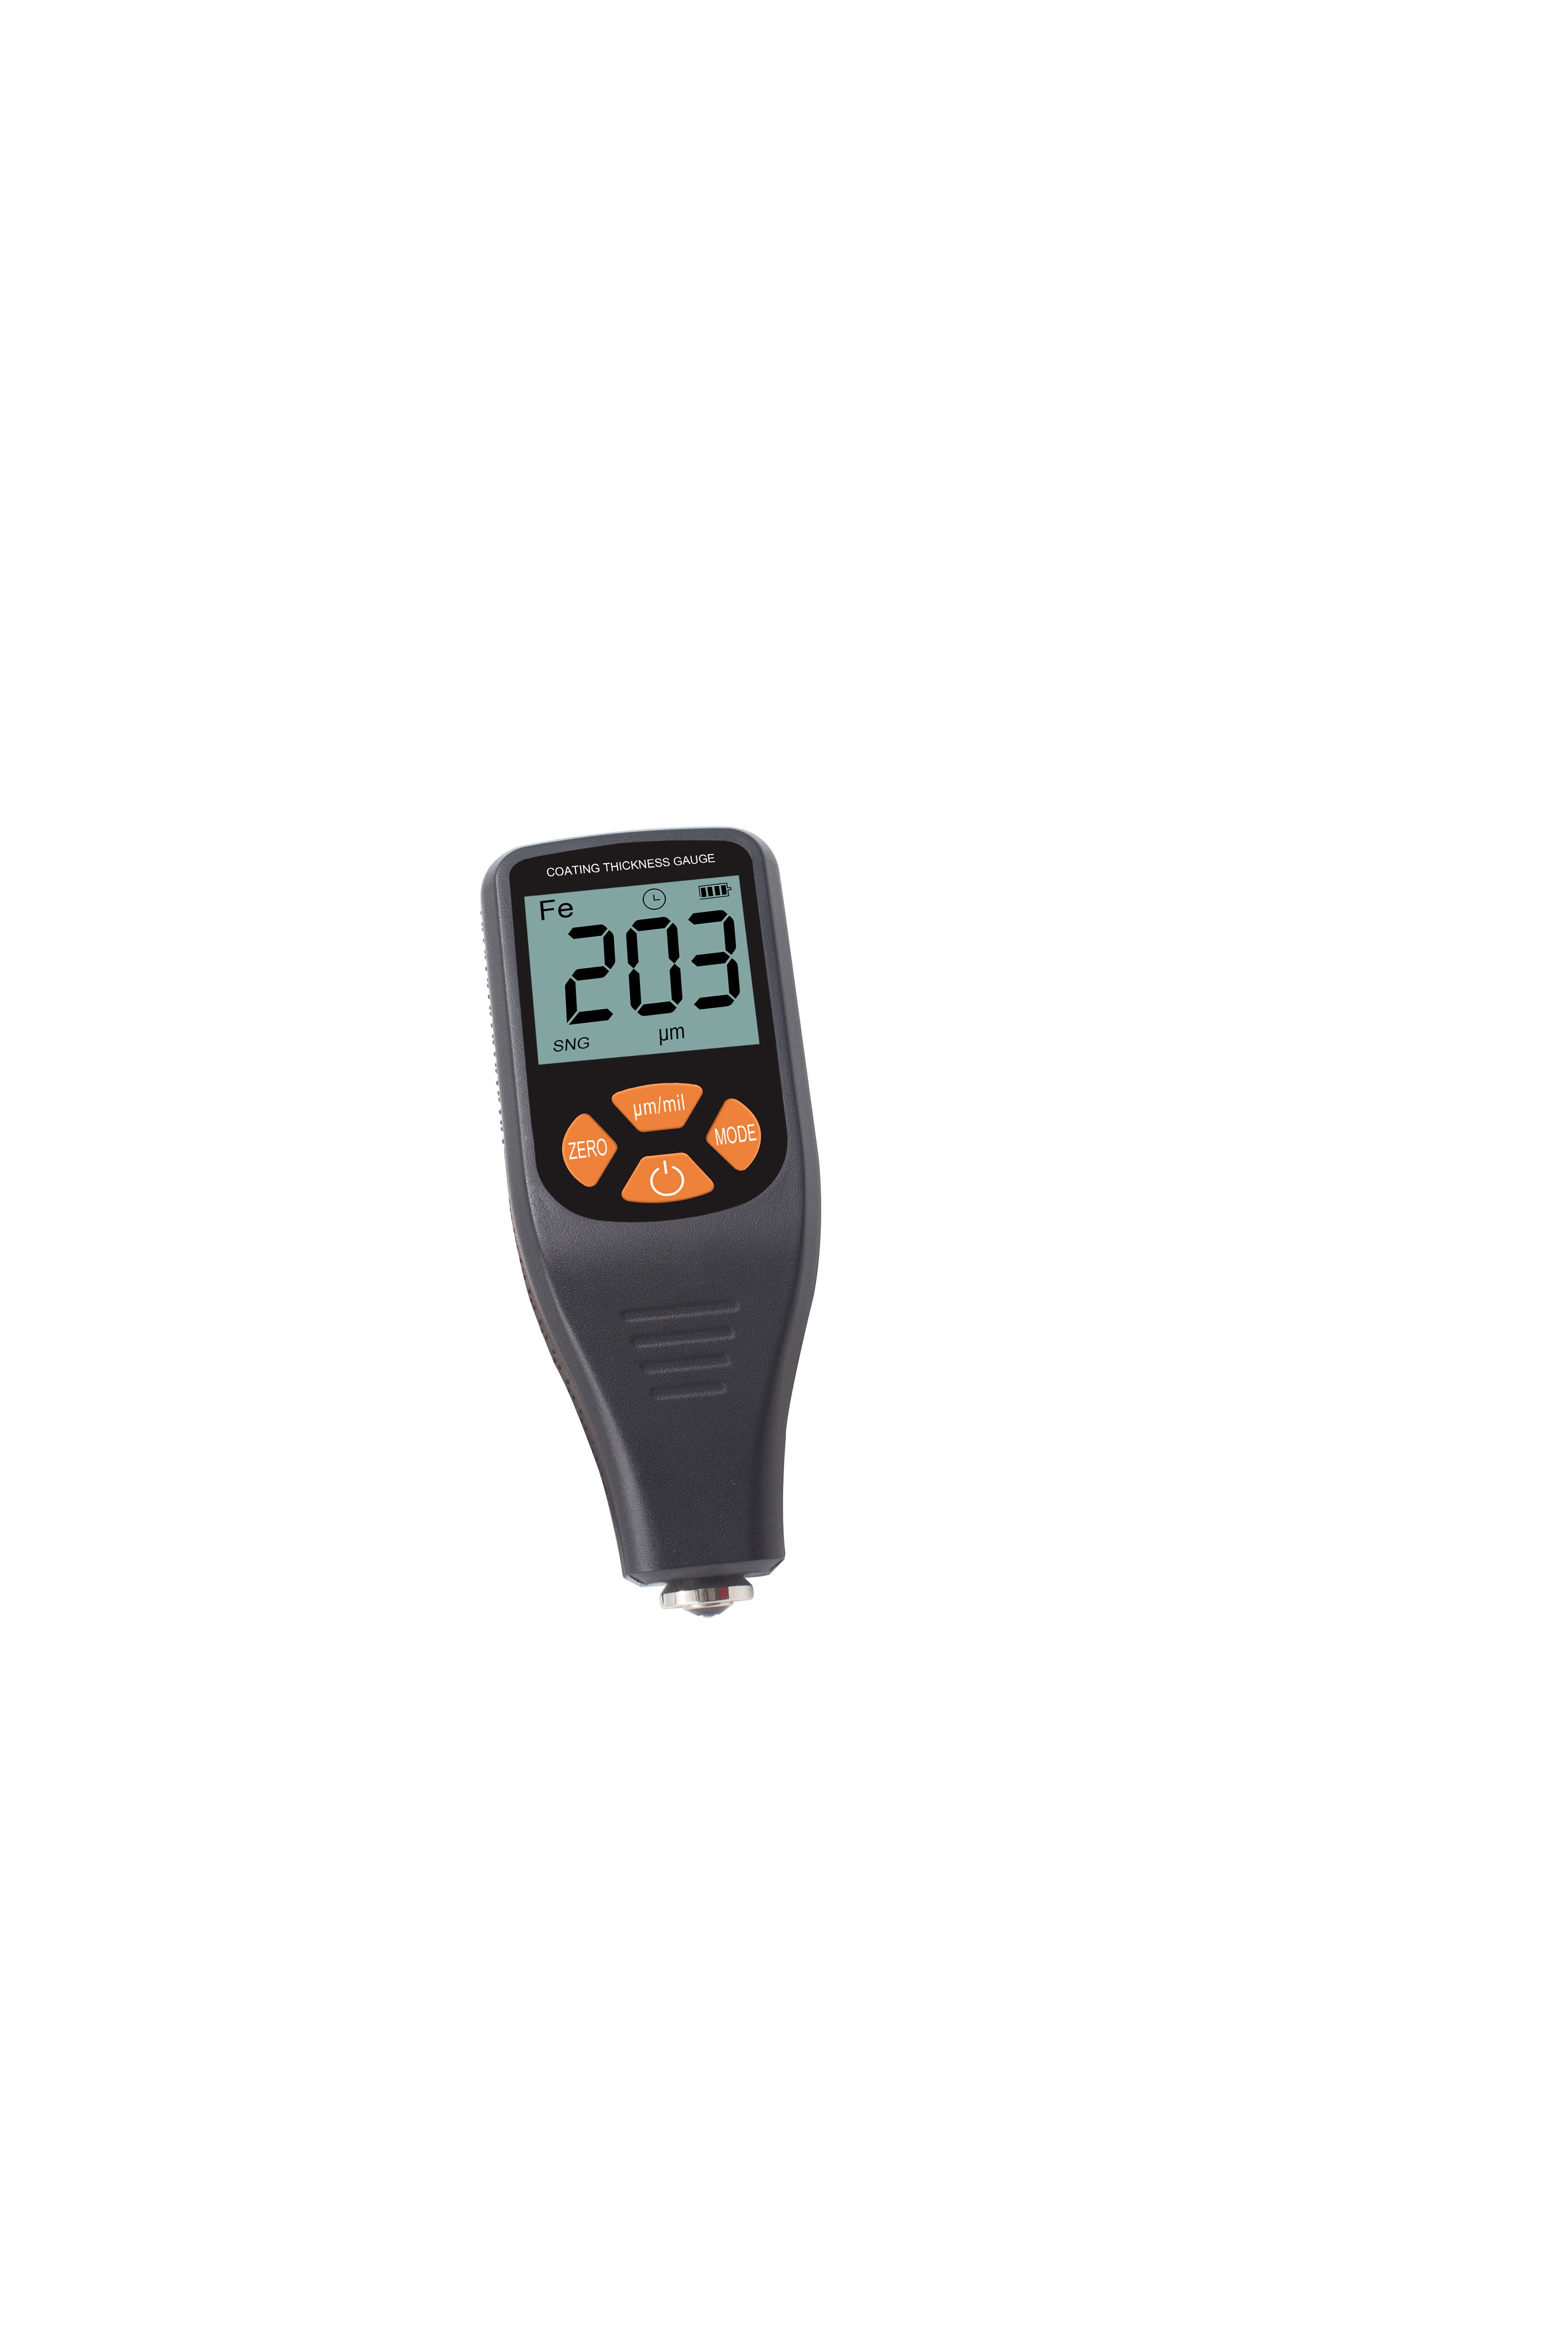 Coating thickness gauge AT 3300 / Coating thickness tester